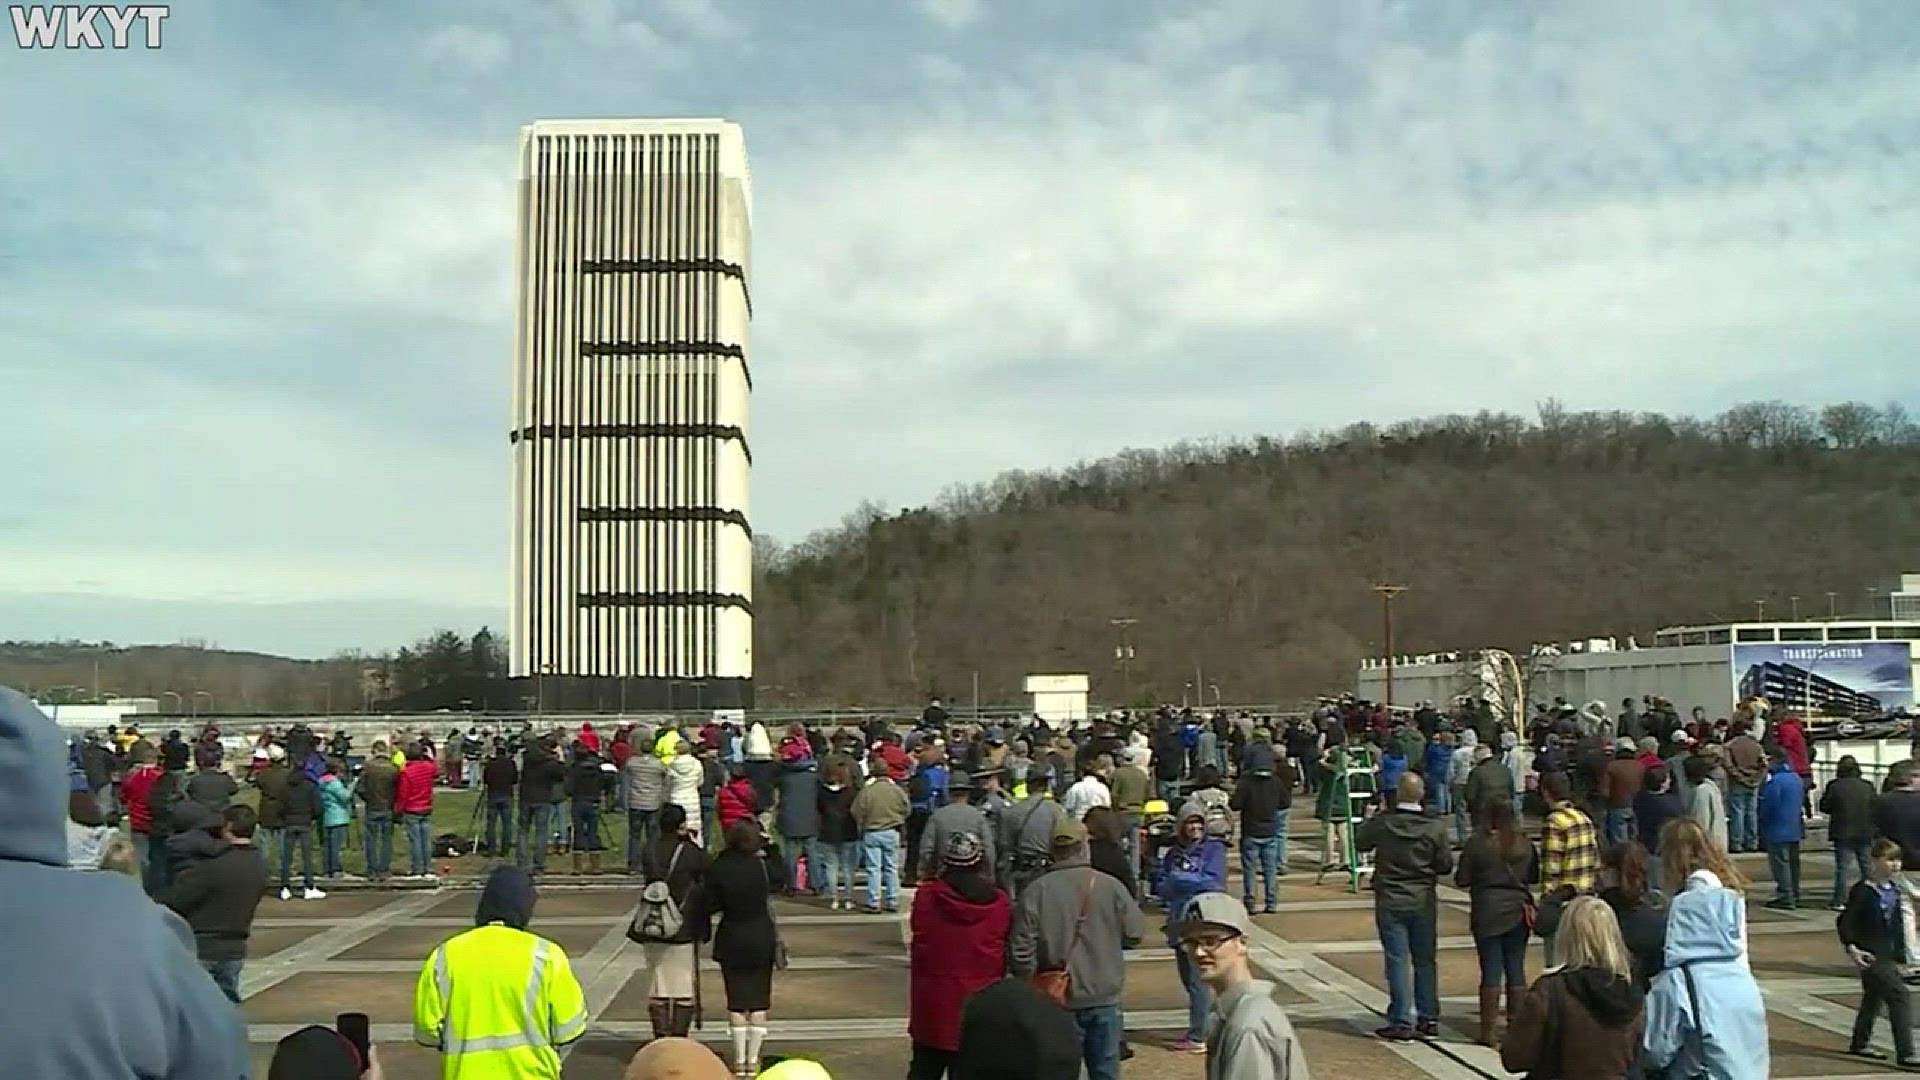 Capital Tower Implosion